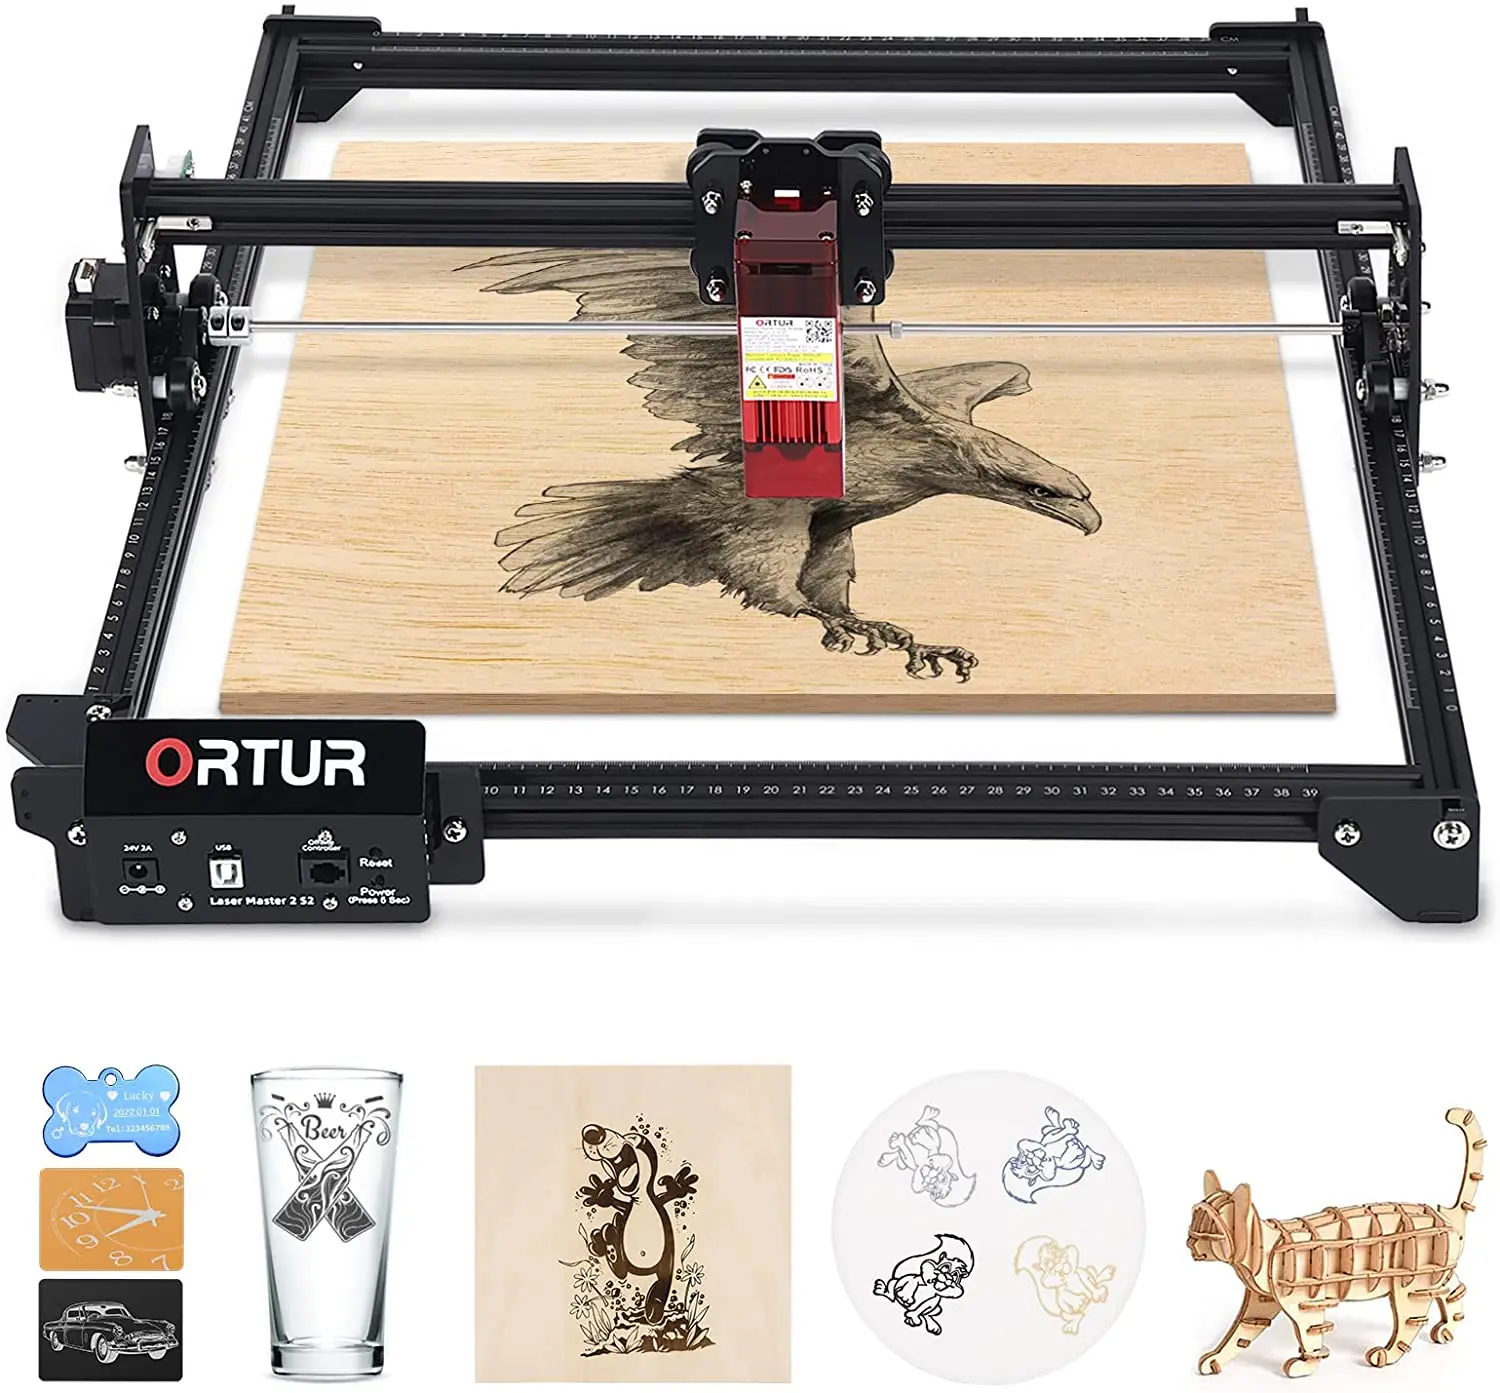 

Ortur LM2S2 Mini Laser Engrave Machine Powerful Desktop 20W Cutting Engraving Tool for Customised Gift Acrylic Woodwork DIY CNC